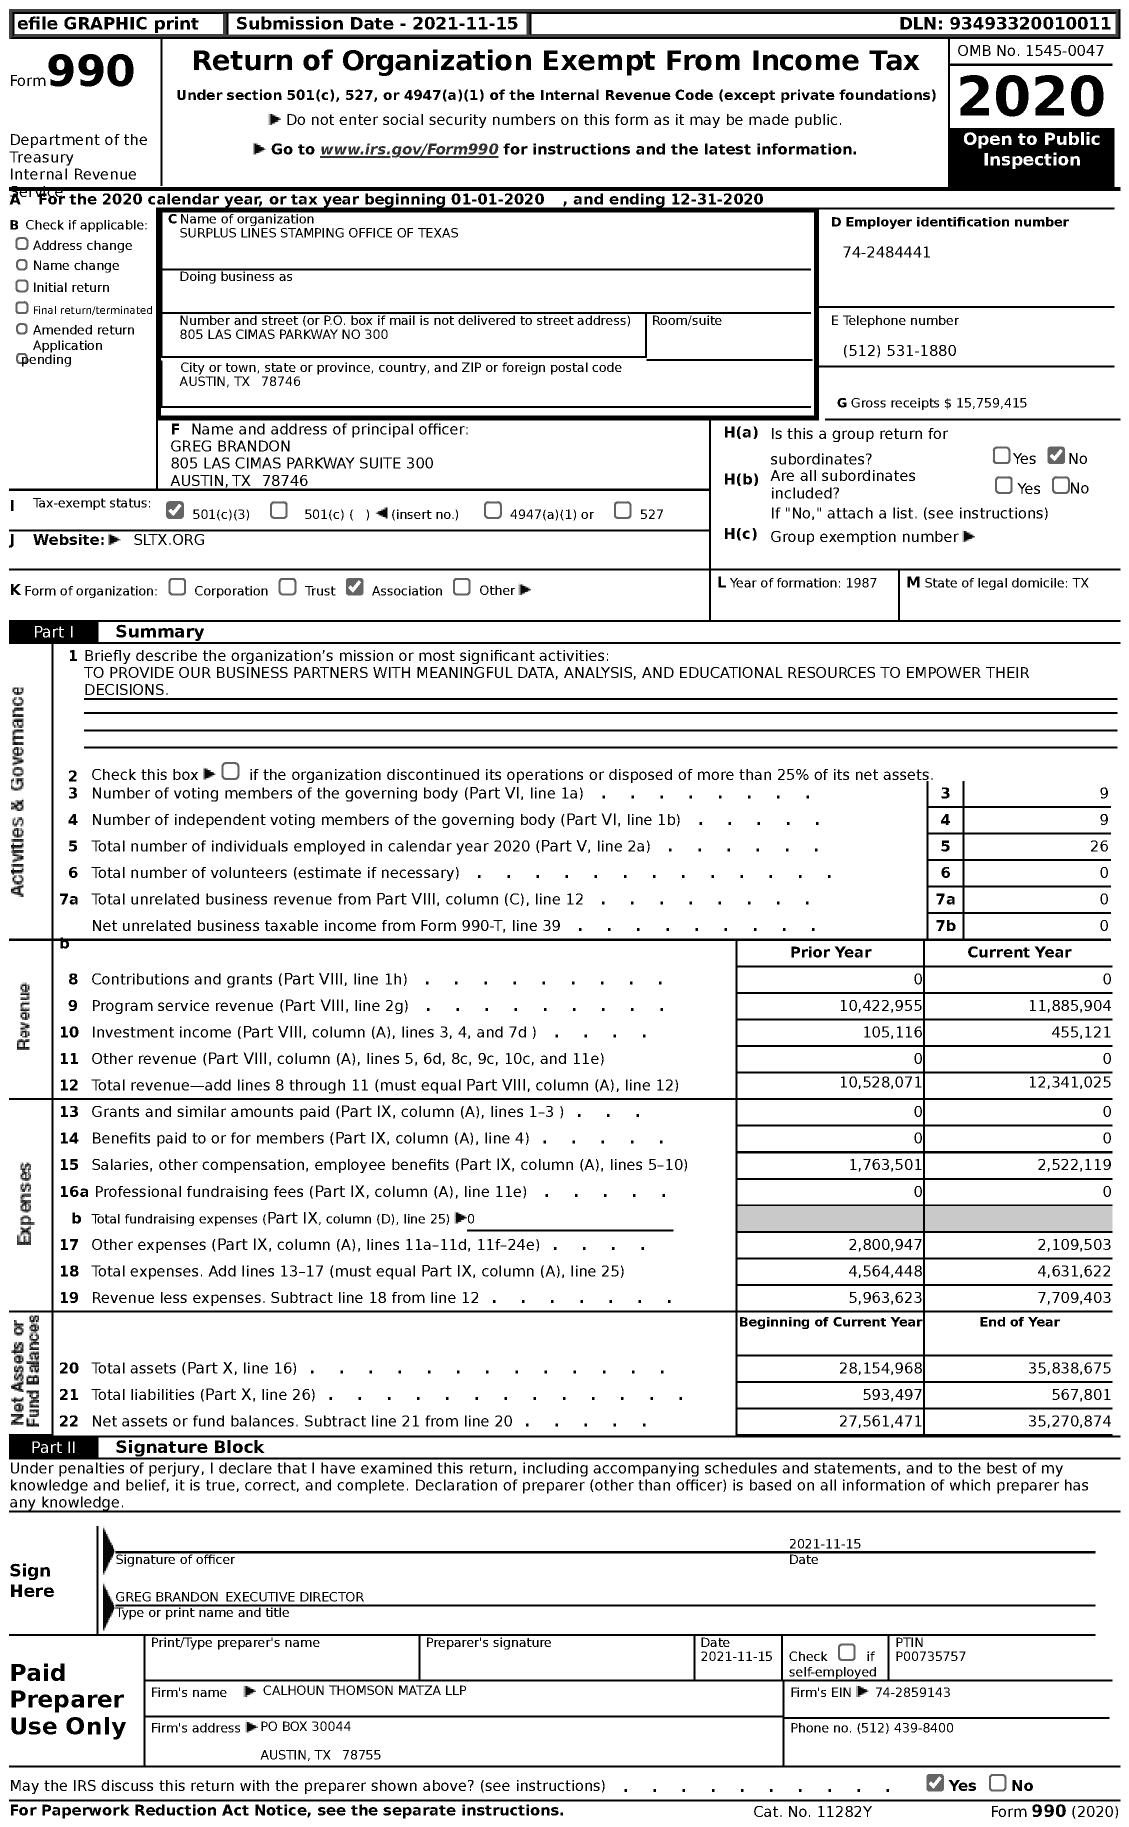 Image of first page of 2020 Form 990 for Surplus Lines Stamping Office of Texas (SLSOT)